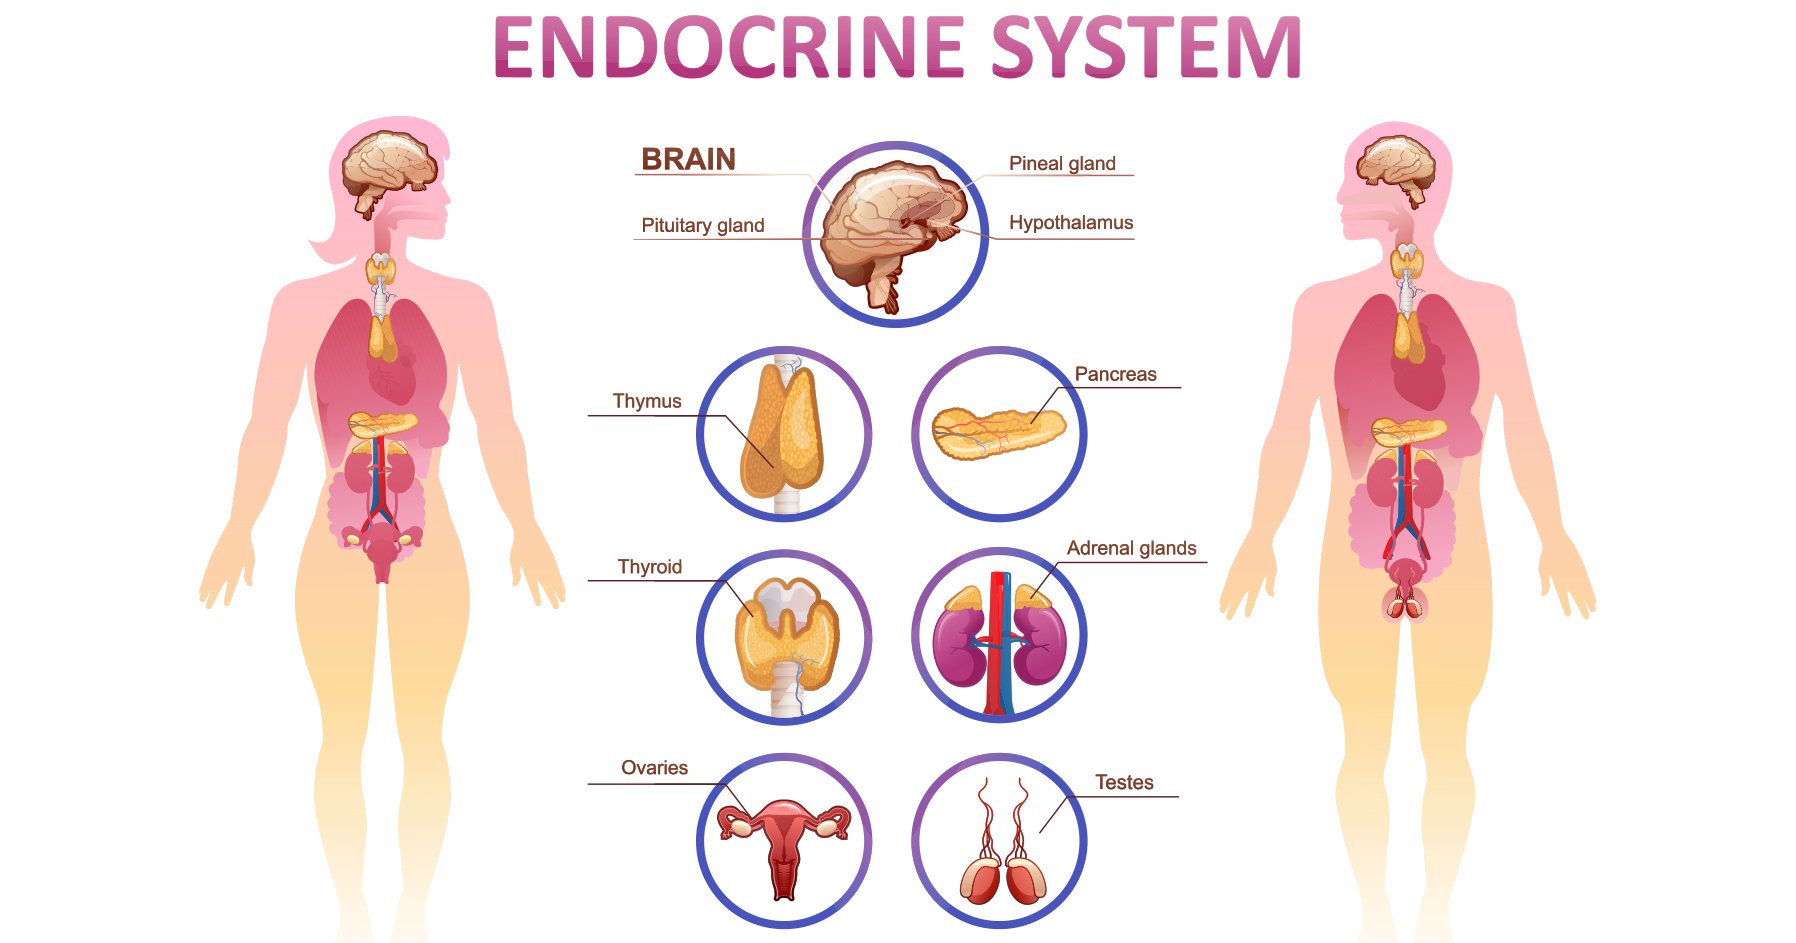 Image of the endocrine system